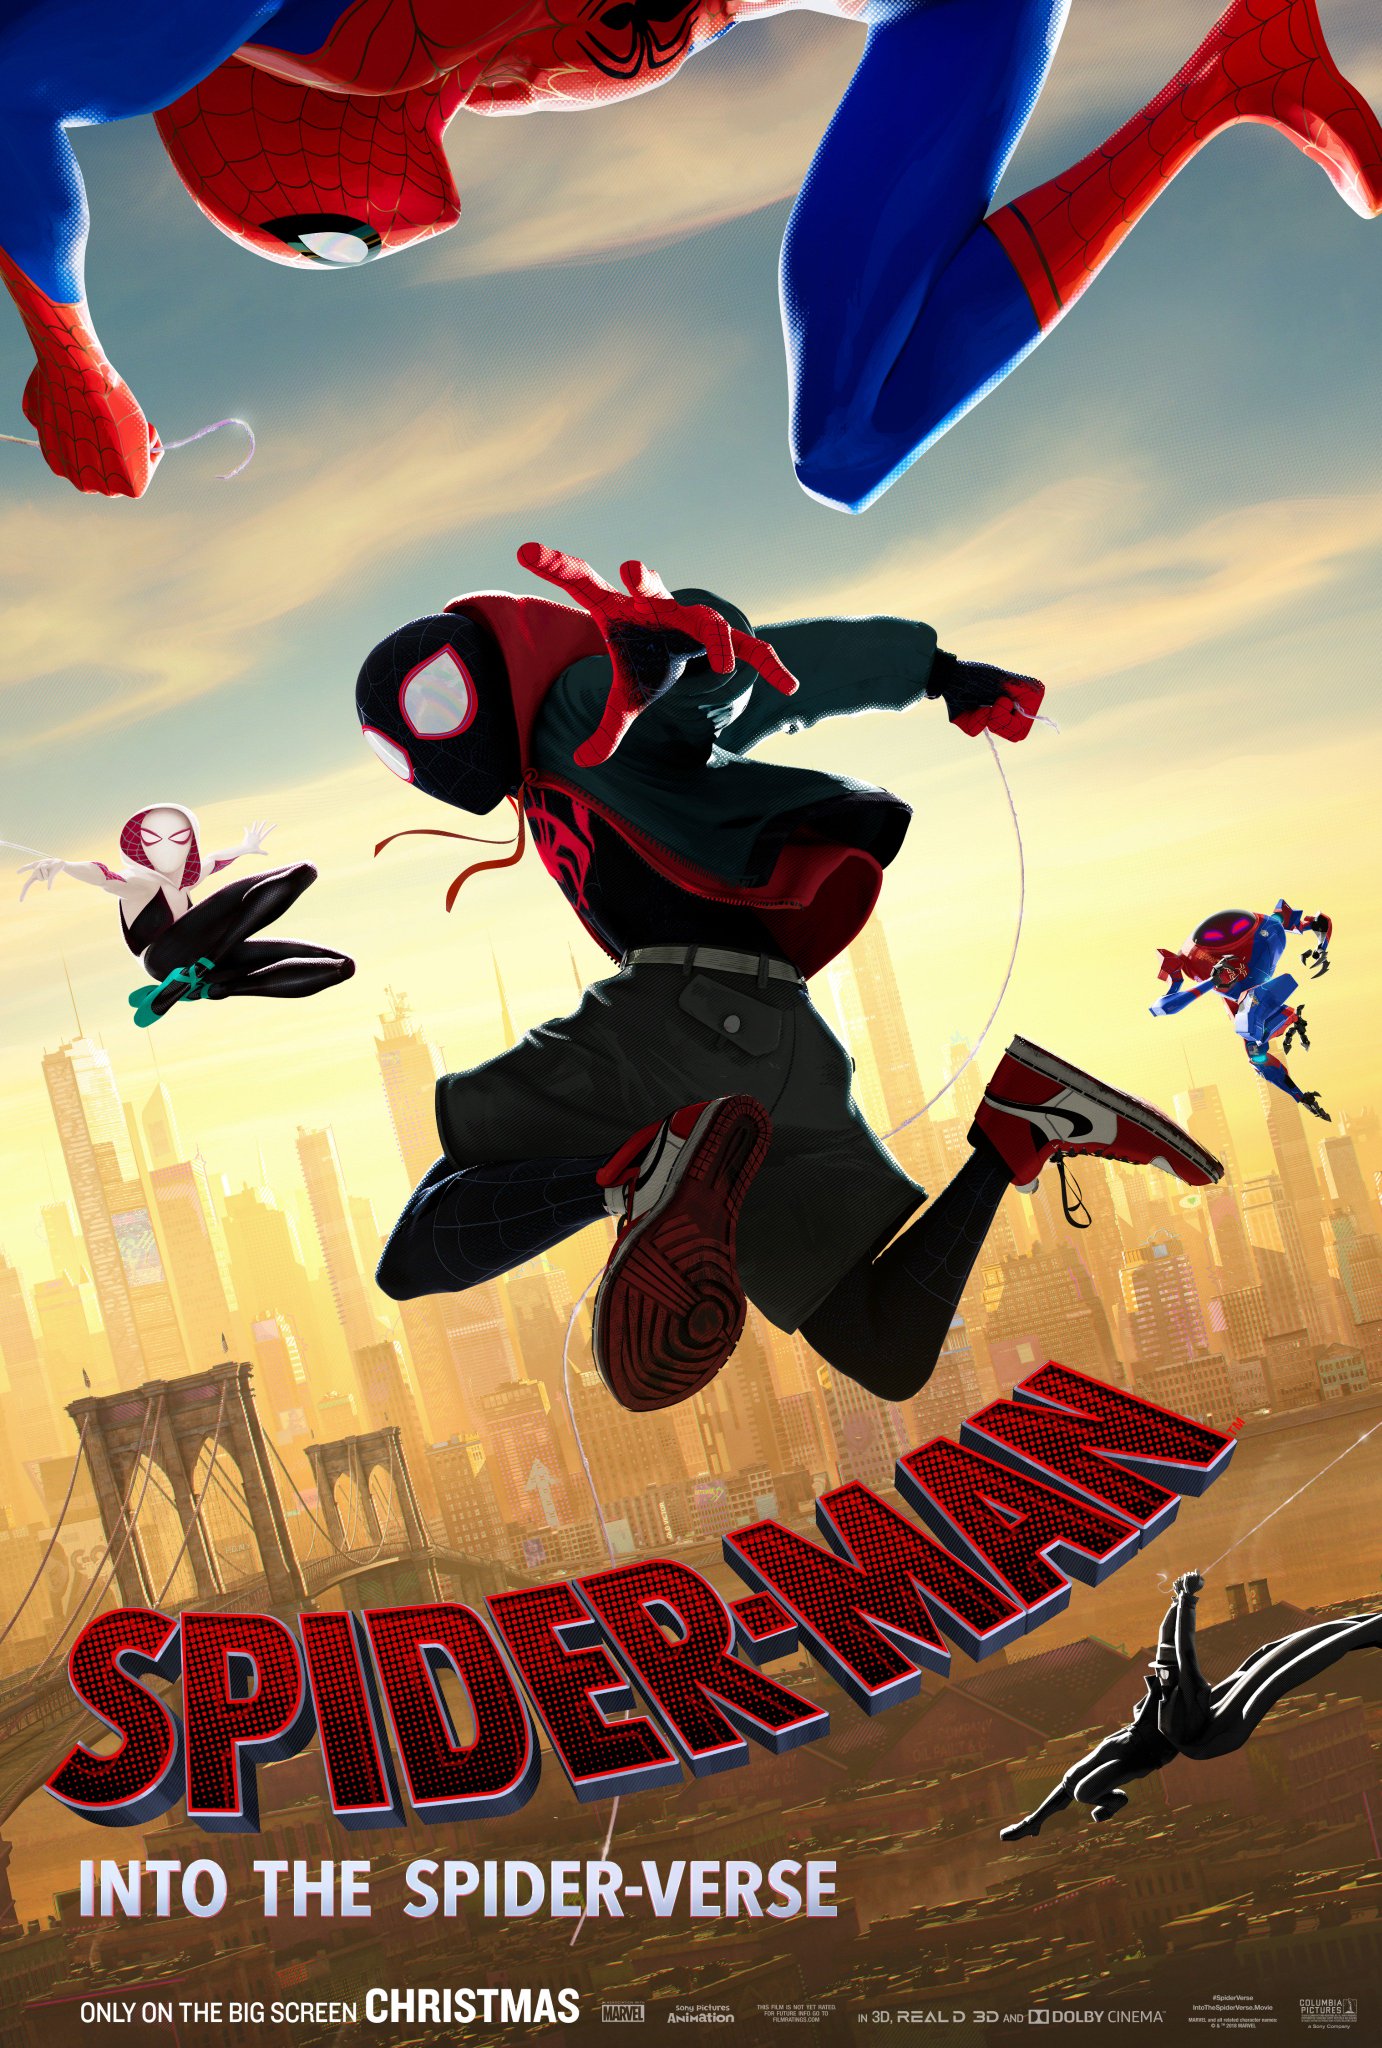 Dog5TIBU0AAfEdl New Trailer for Spider-Man: Into the Spider-Verse Features More Spider-People